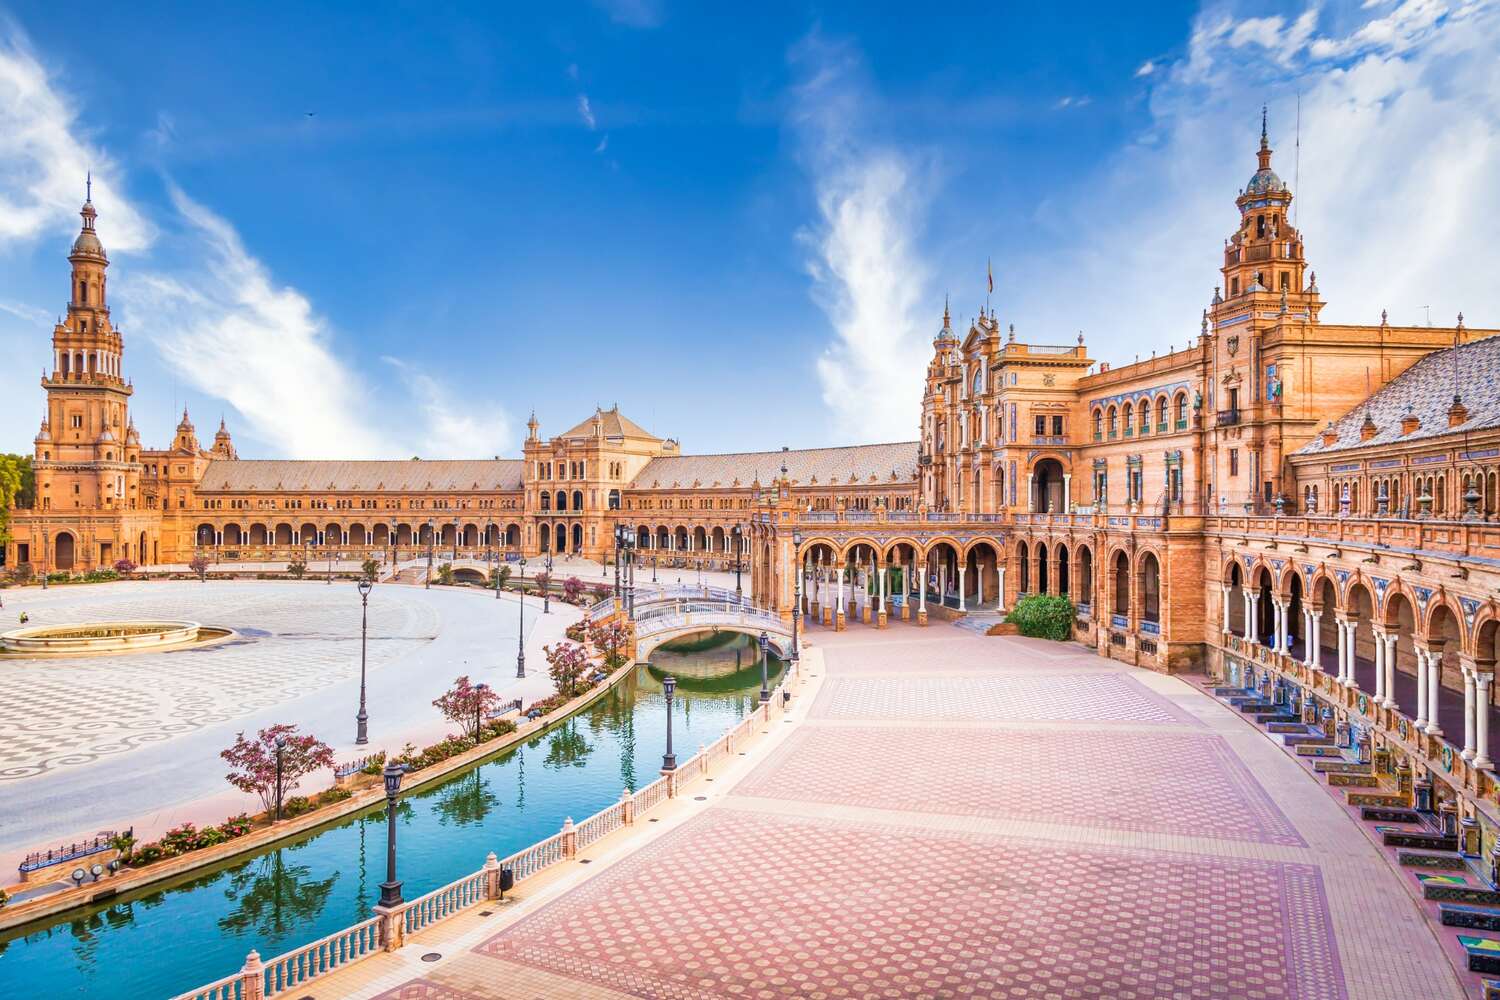 Seville's Plaza de España with its semicircular brick pavilion and water canal under a clear sky.